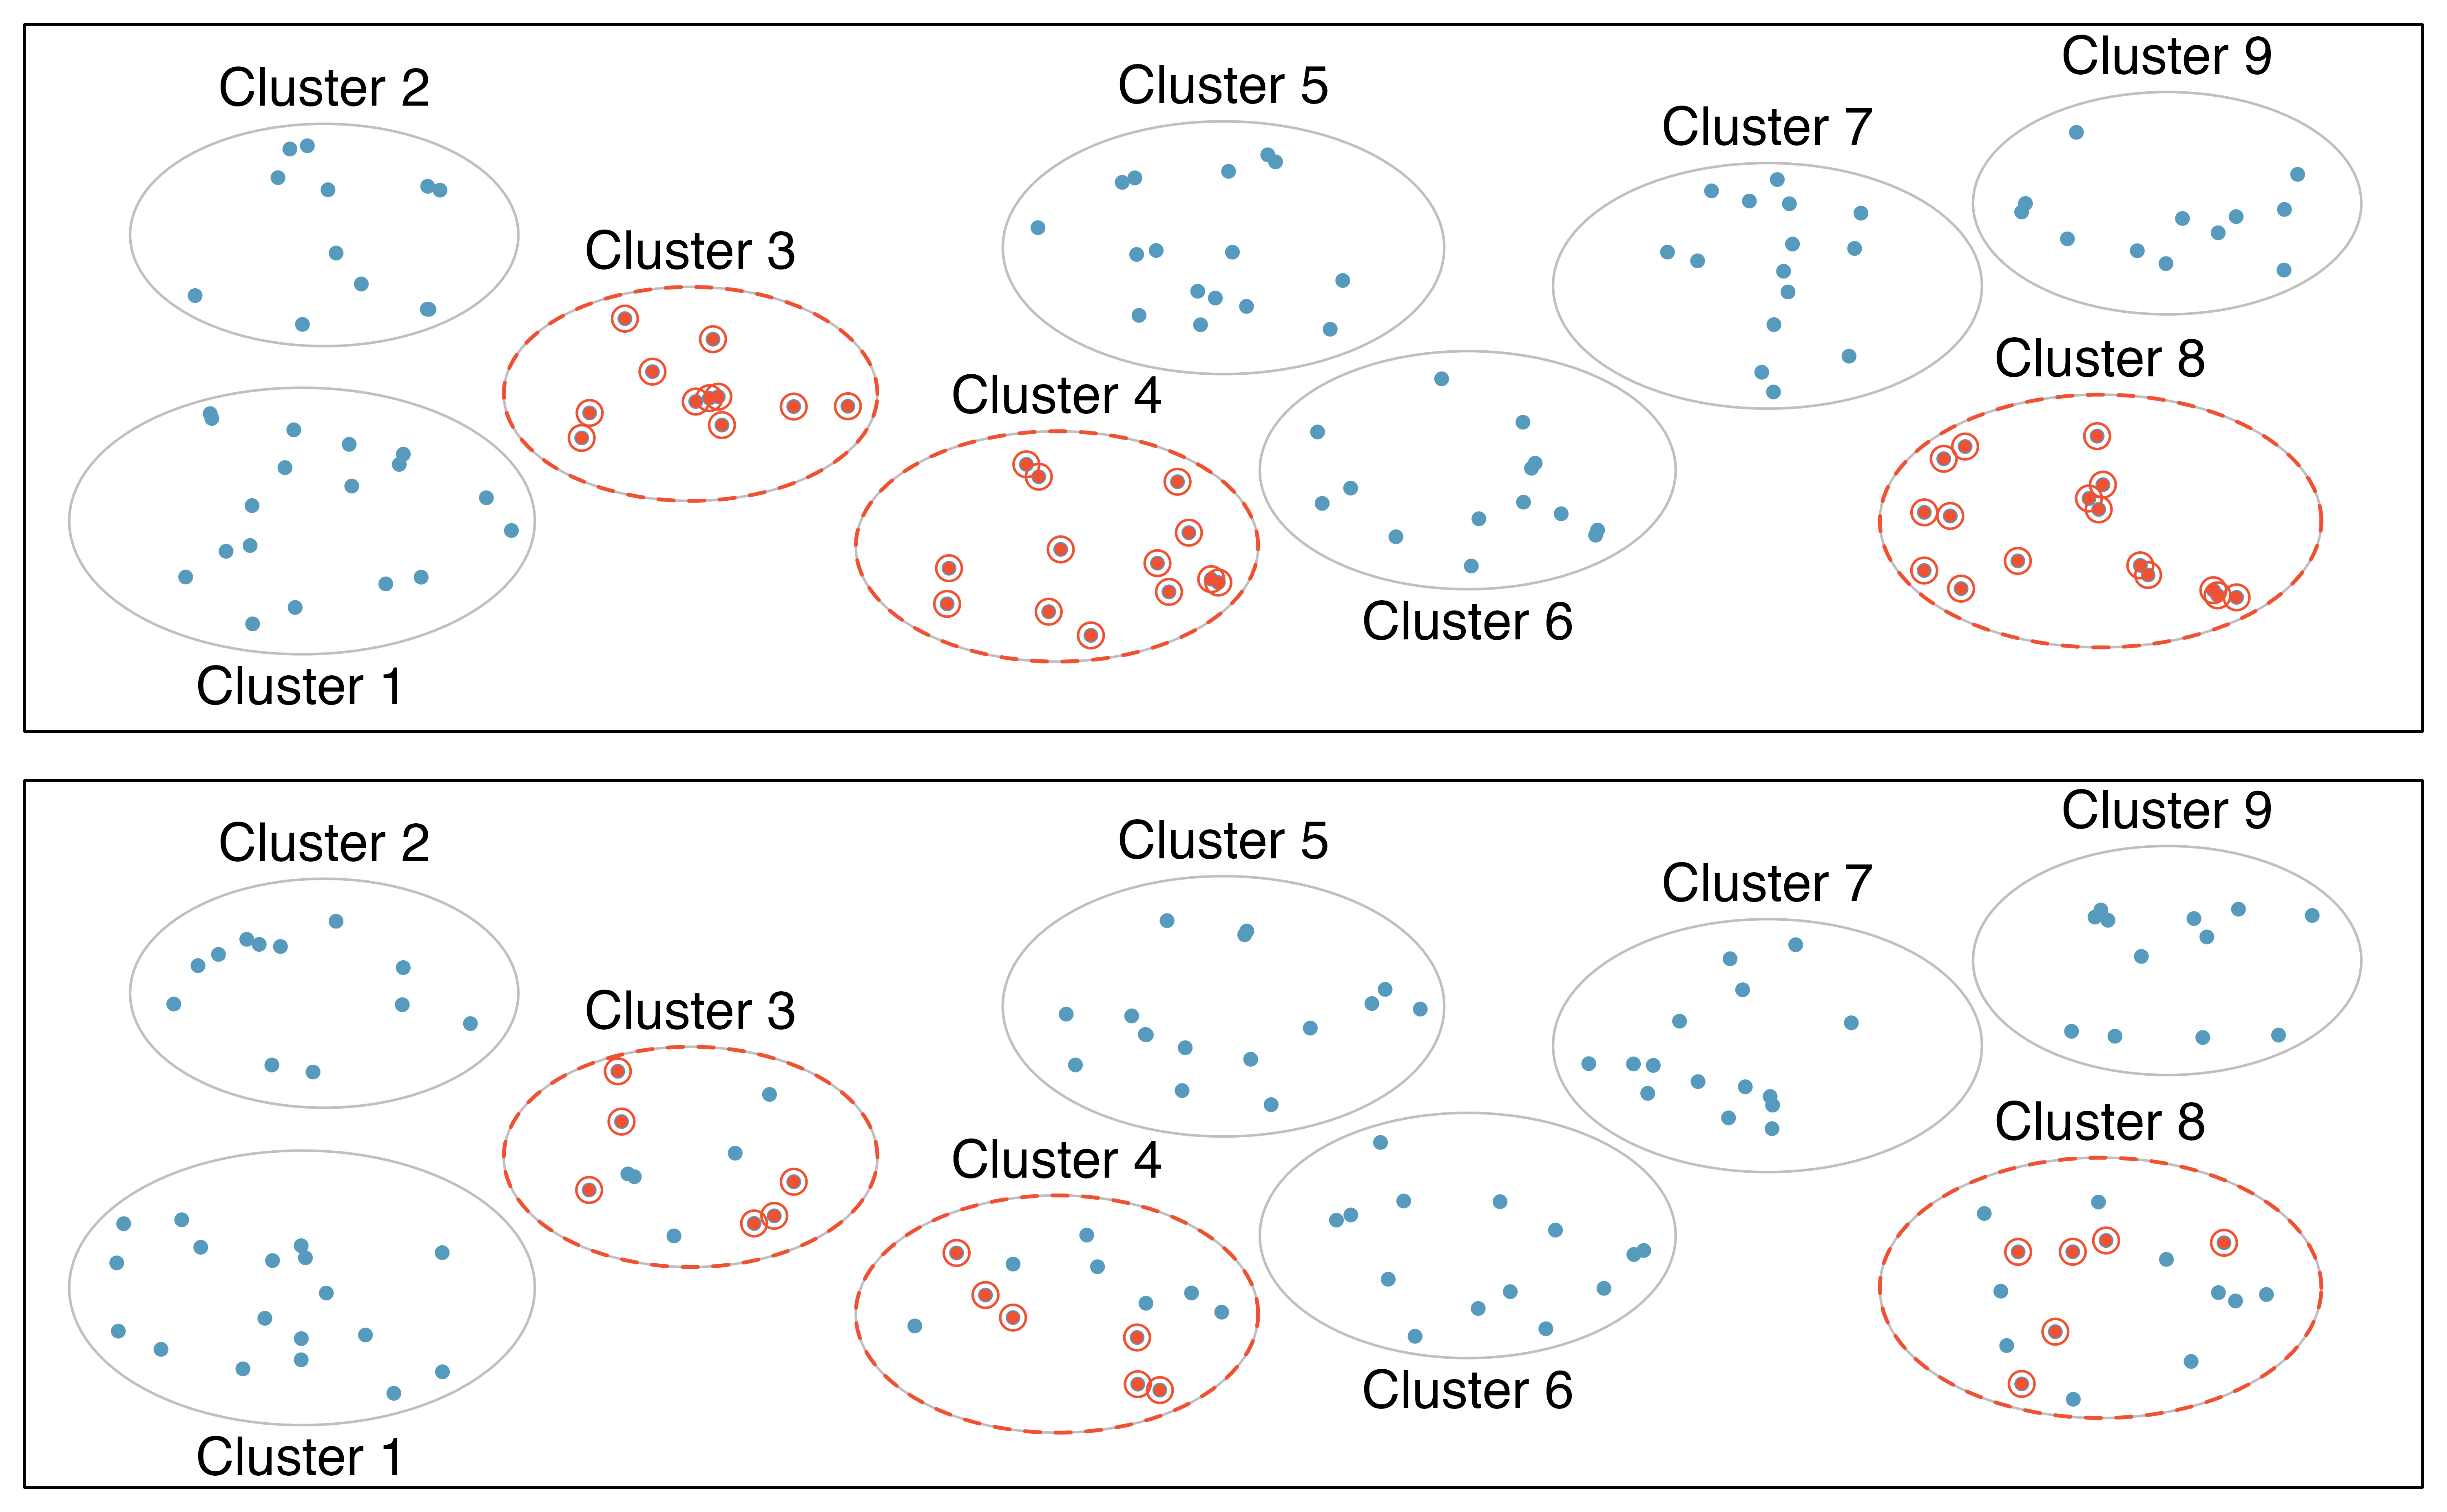 Examples of cluster and multistage sampling. In the top panel, cluster sampling was used: data were binned into nine clusters, three of these clusters were sampled, and all observations within these three cluster were included in the sample. In the bottom panel, multistage sampling was used, which differs from cluster sampling only in that we randomly select a subset of each cluster to be included in the sample rather than measuring every case in each sampled cluster.